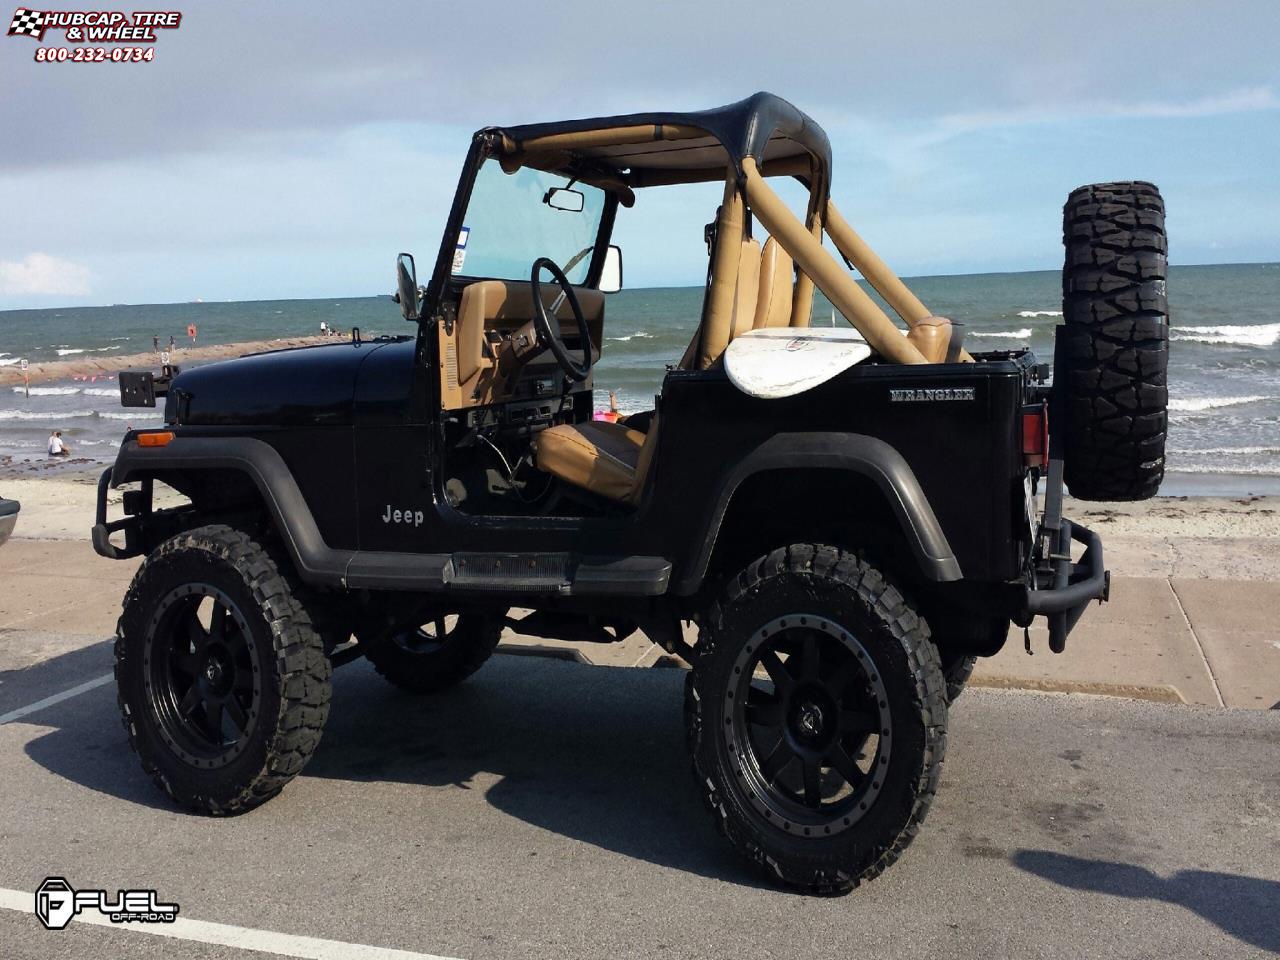 vehicle gallery/jeep wrangler fuel trophy d551 0X0  Matte Black w/ Anthracite Ring wheels and rims